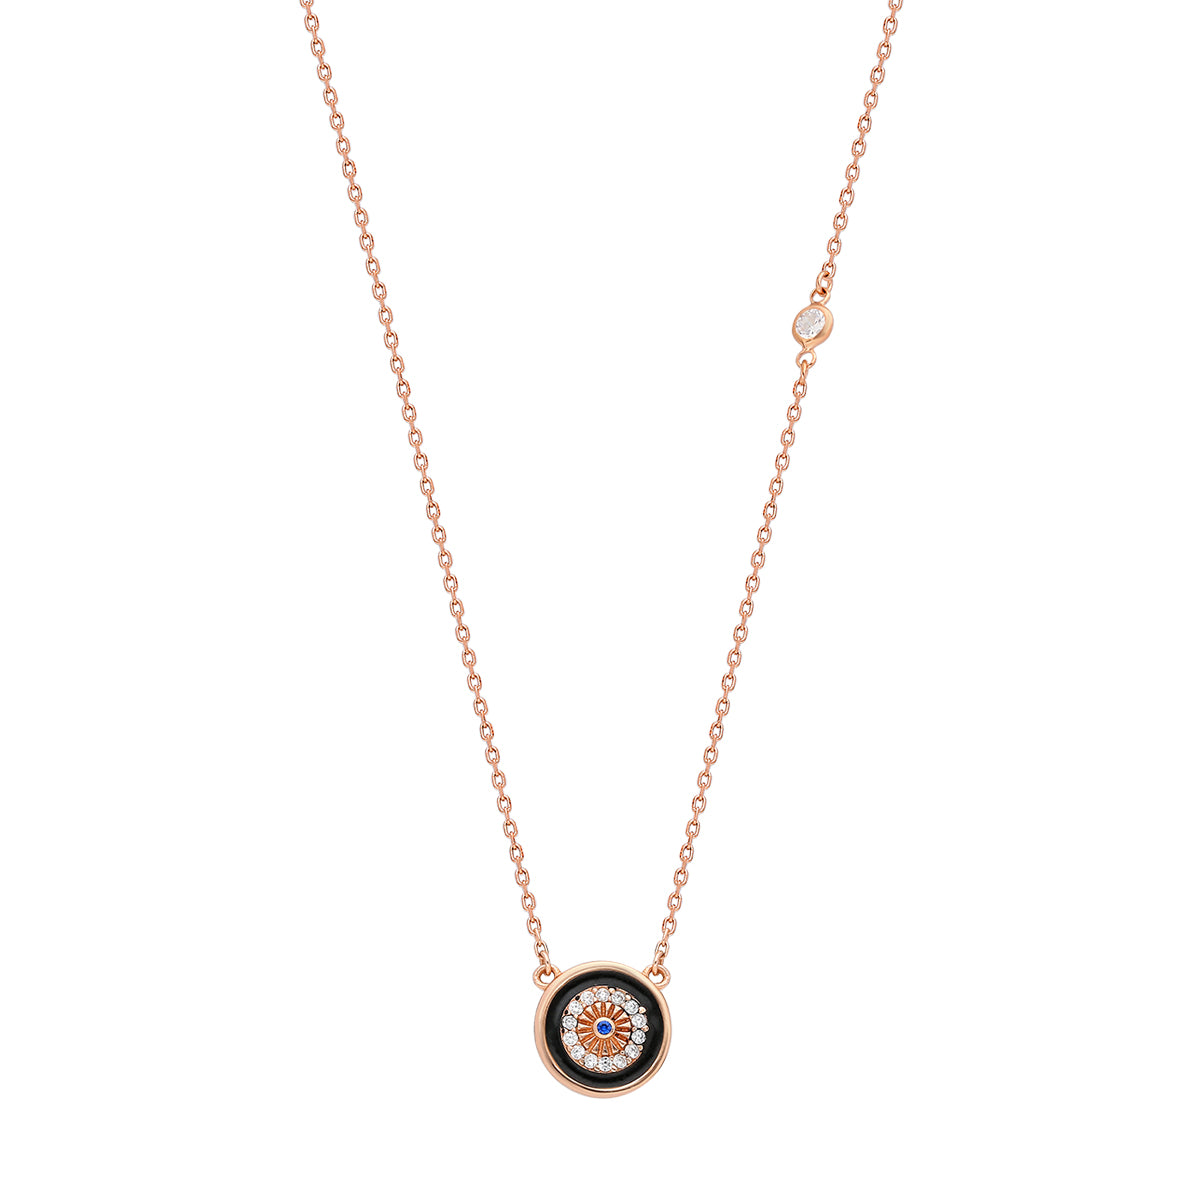 925 Sterling silver, rose gold plated necklace with black enamel and zirconia stones circle pendant.